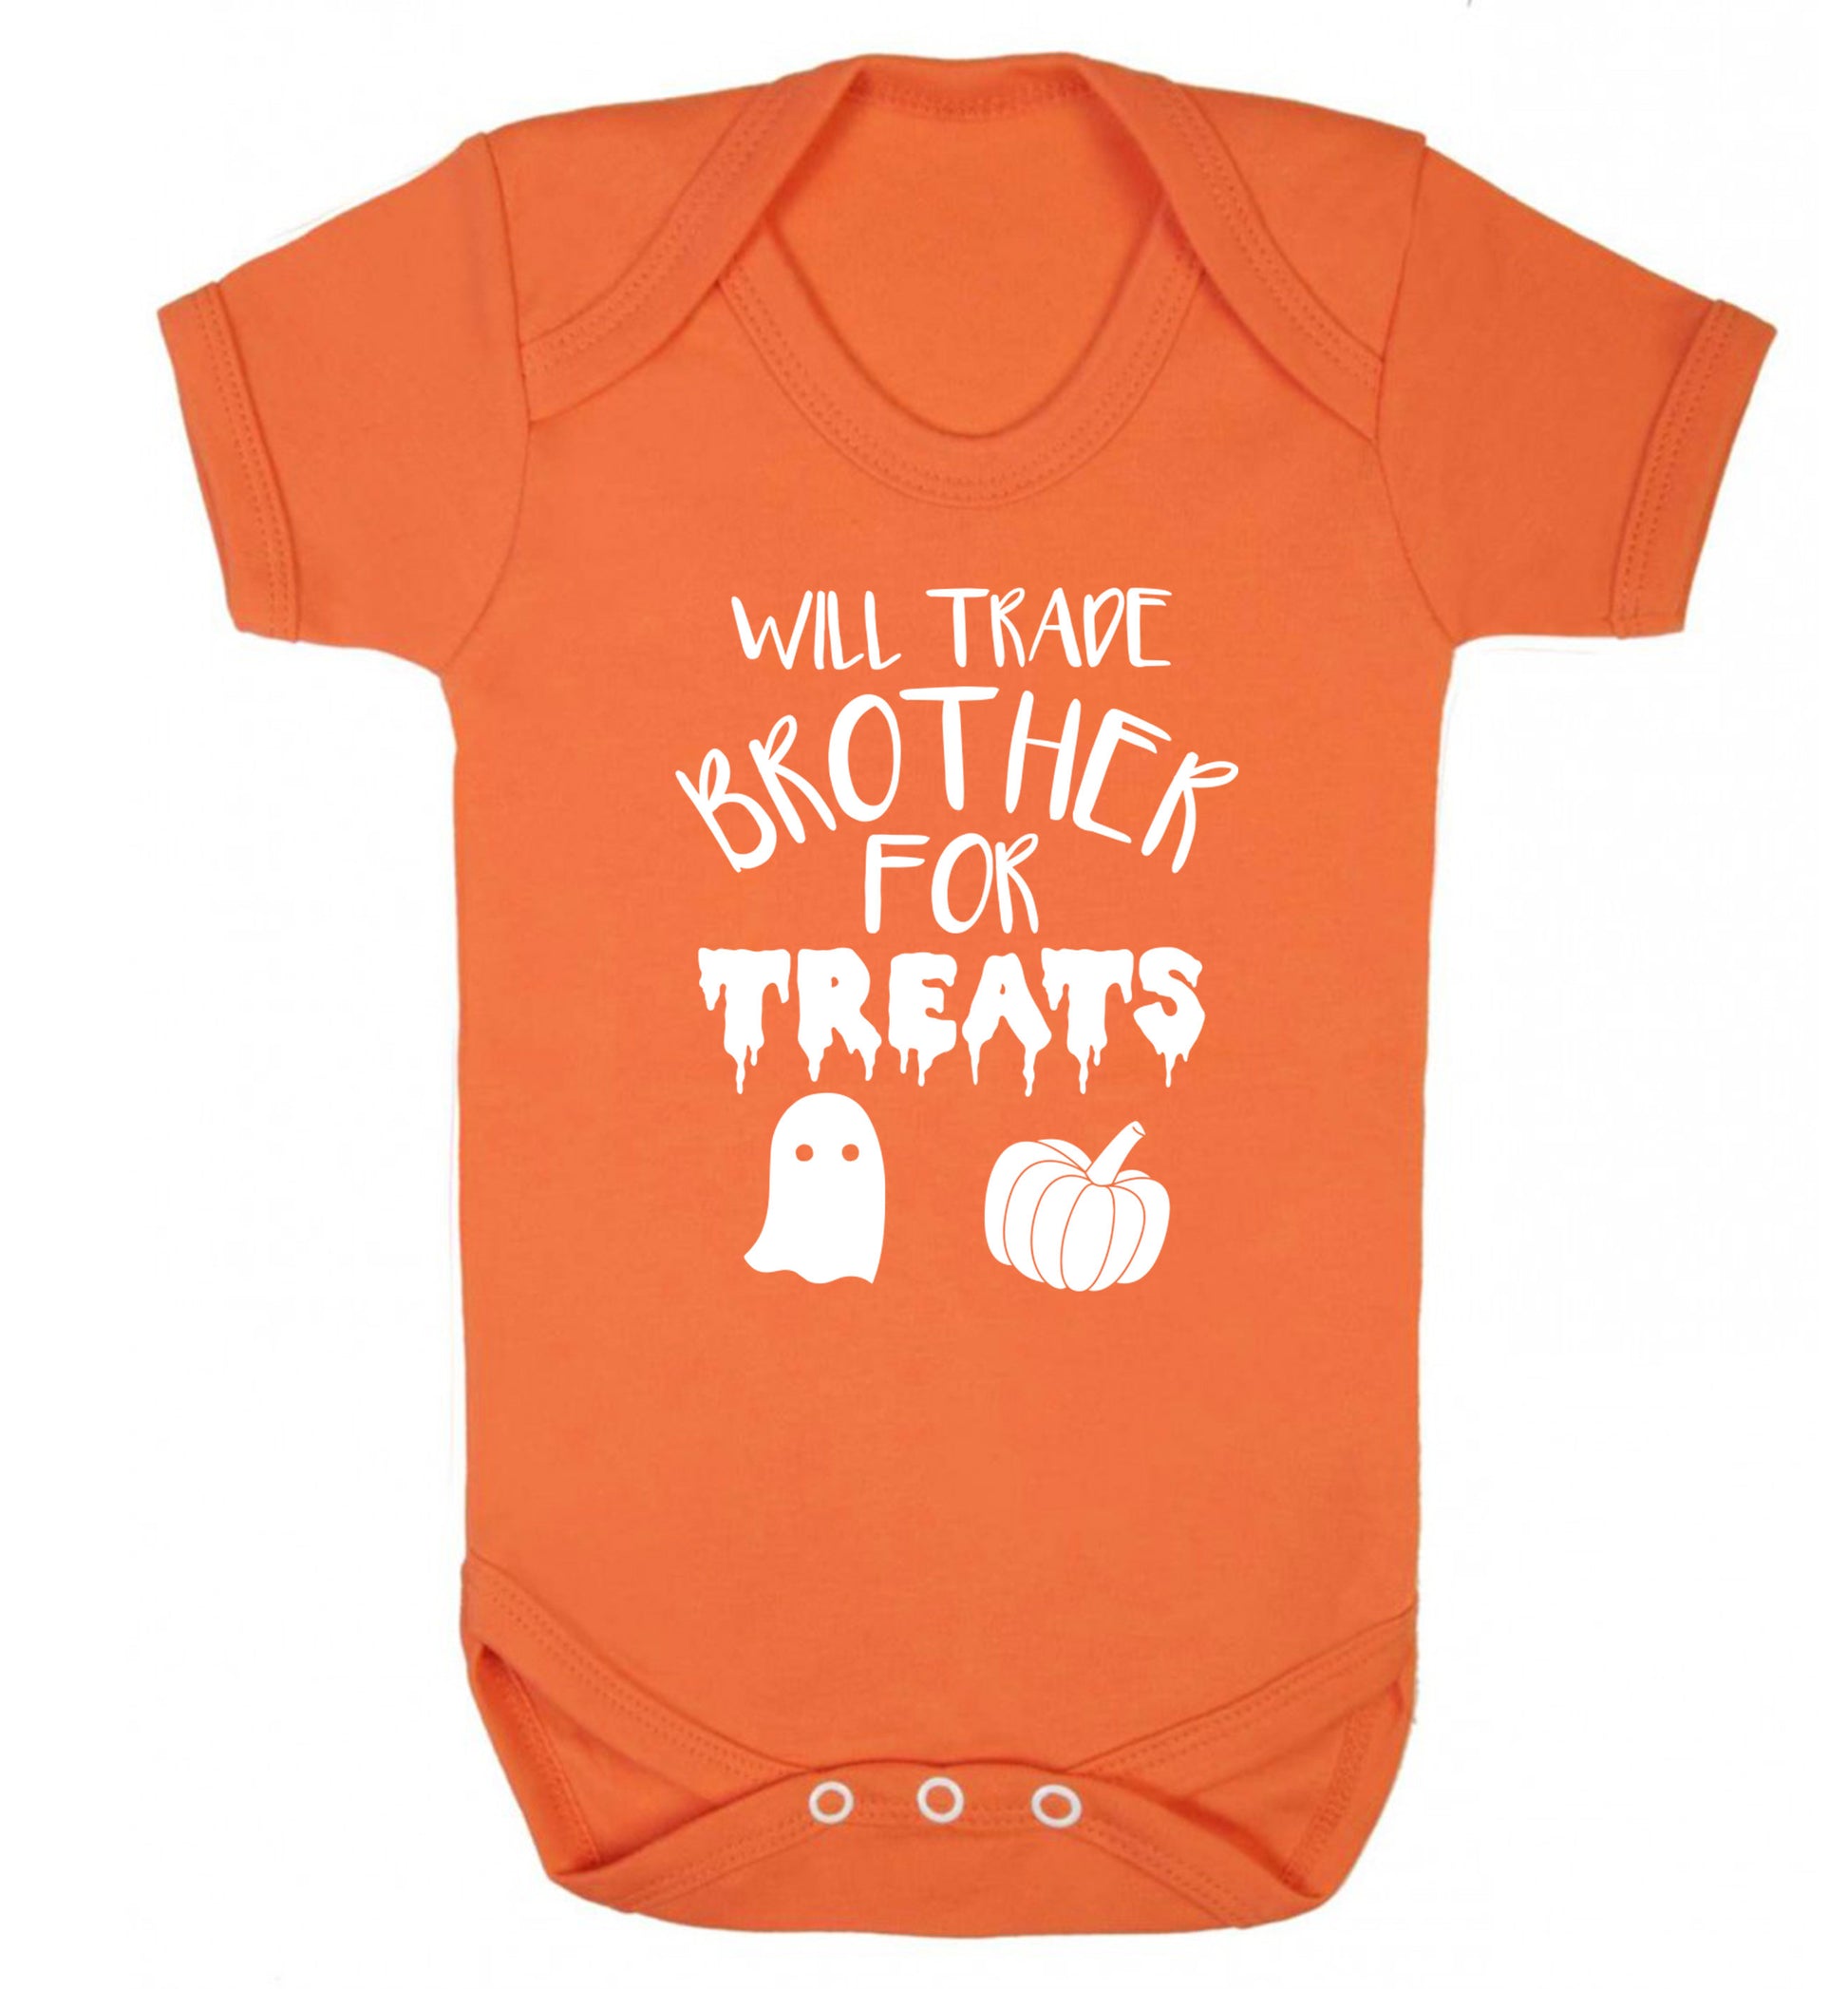 Will trade brother for treats Baby Vest orange 18-24 months